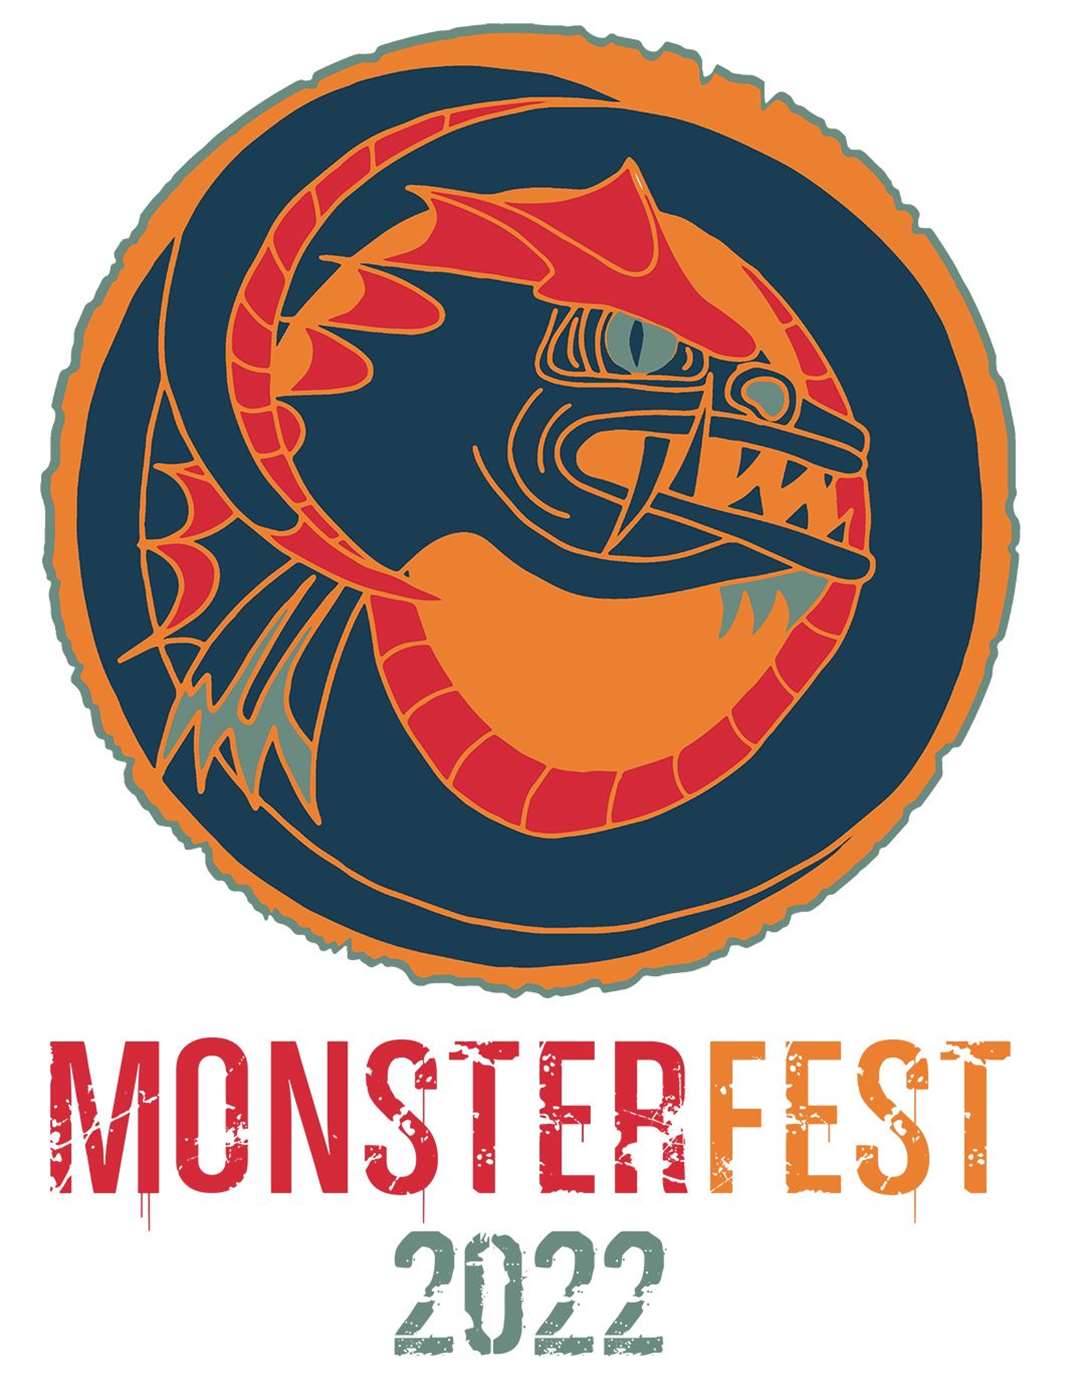 Monsterfest was based at Eden Court for the first time..